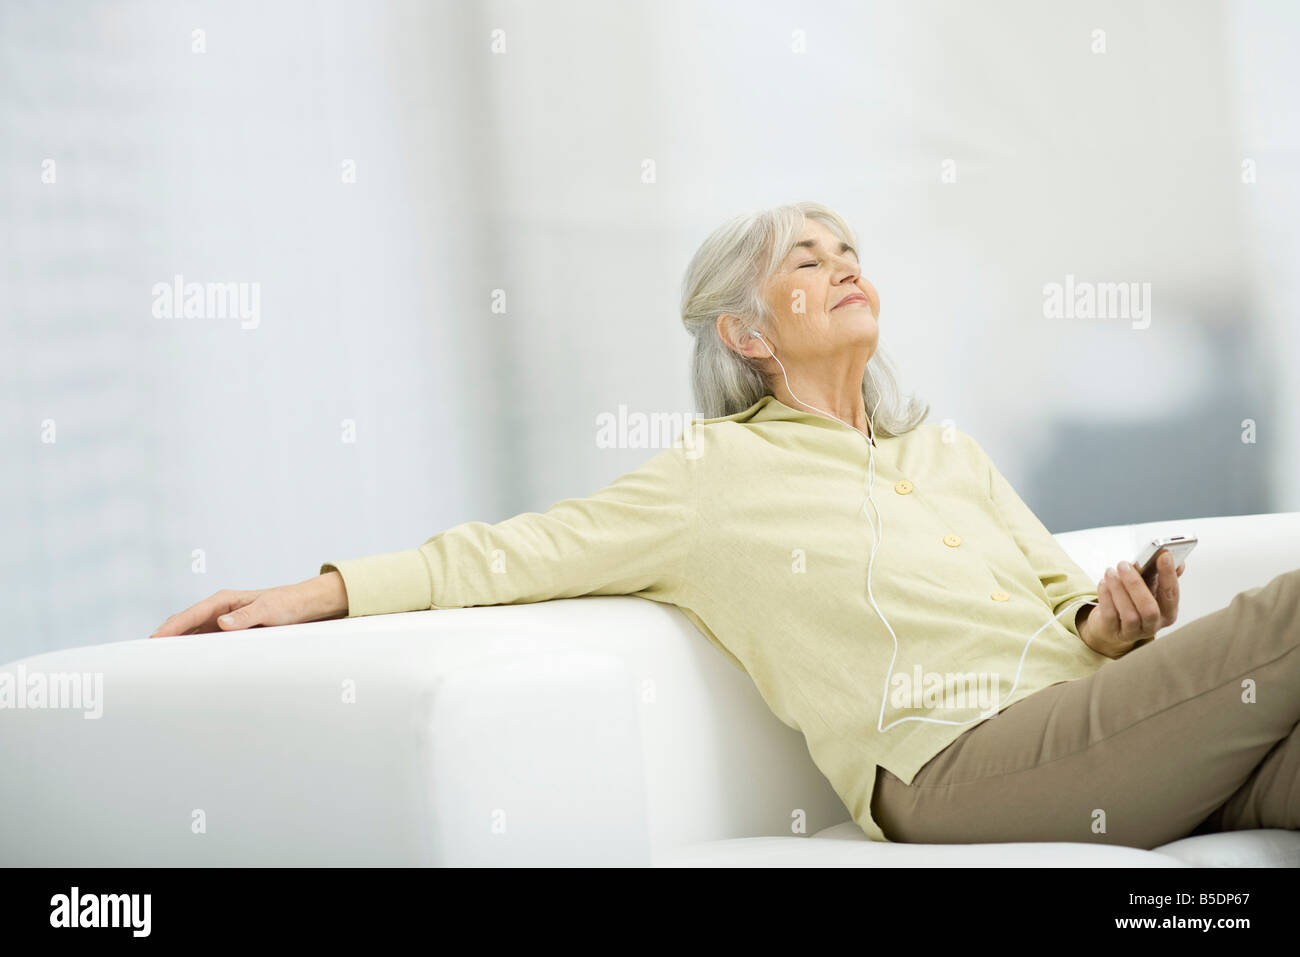 Pregnant woman sitting on couch, smiling Banque D'Images